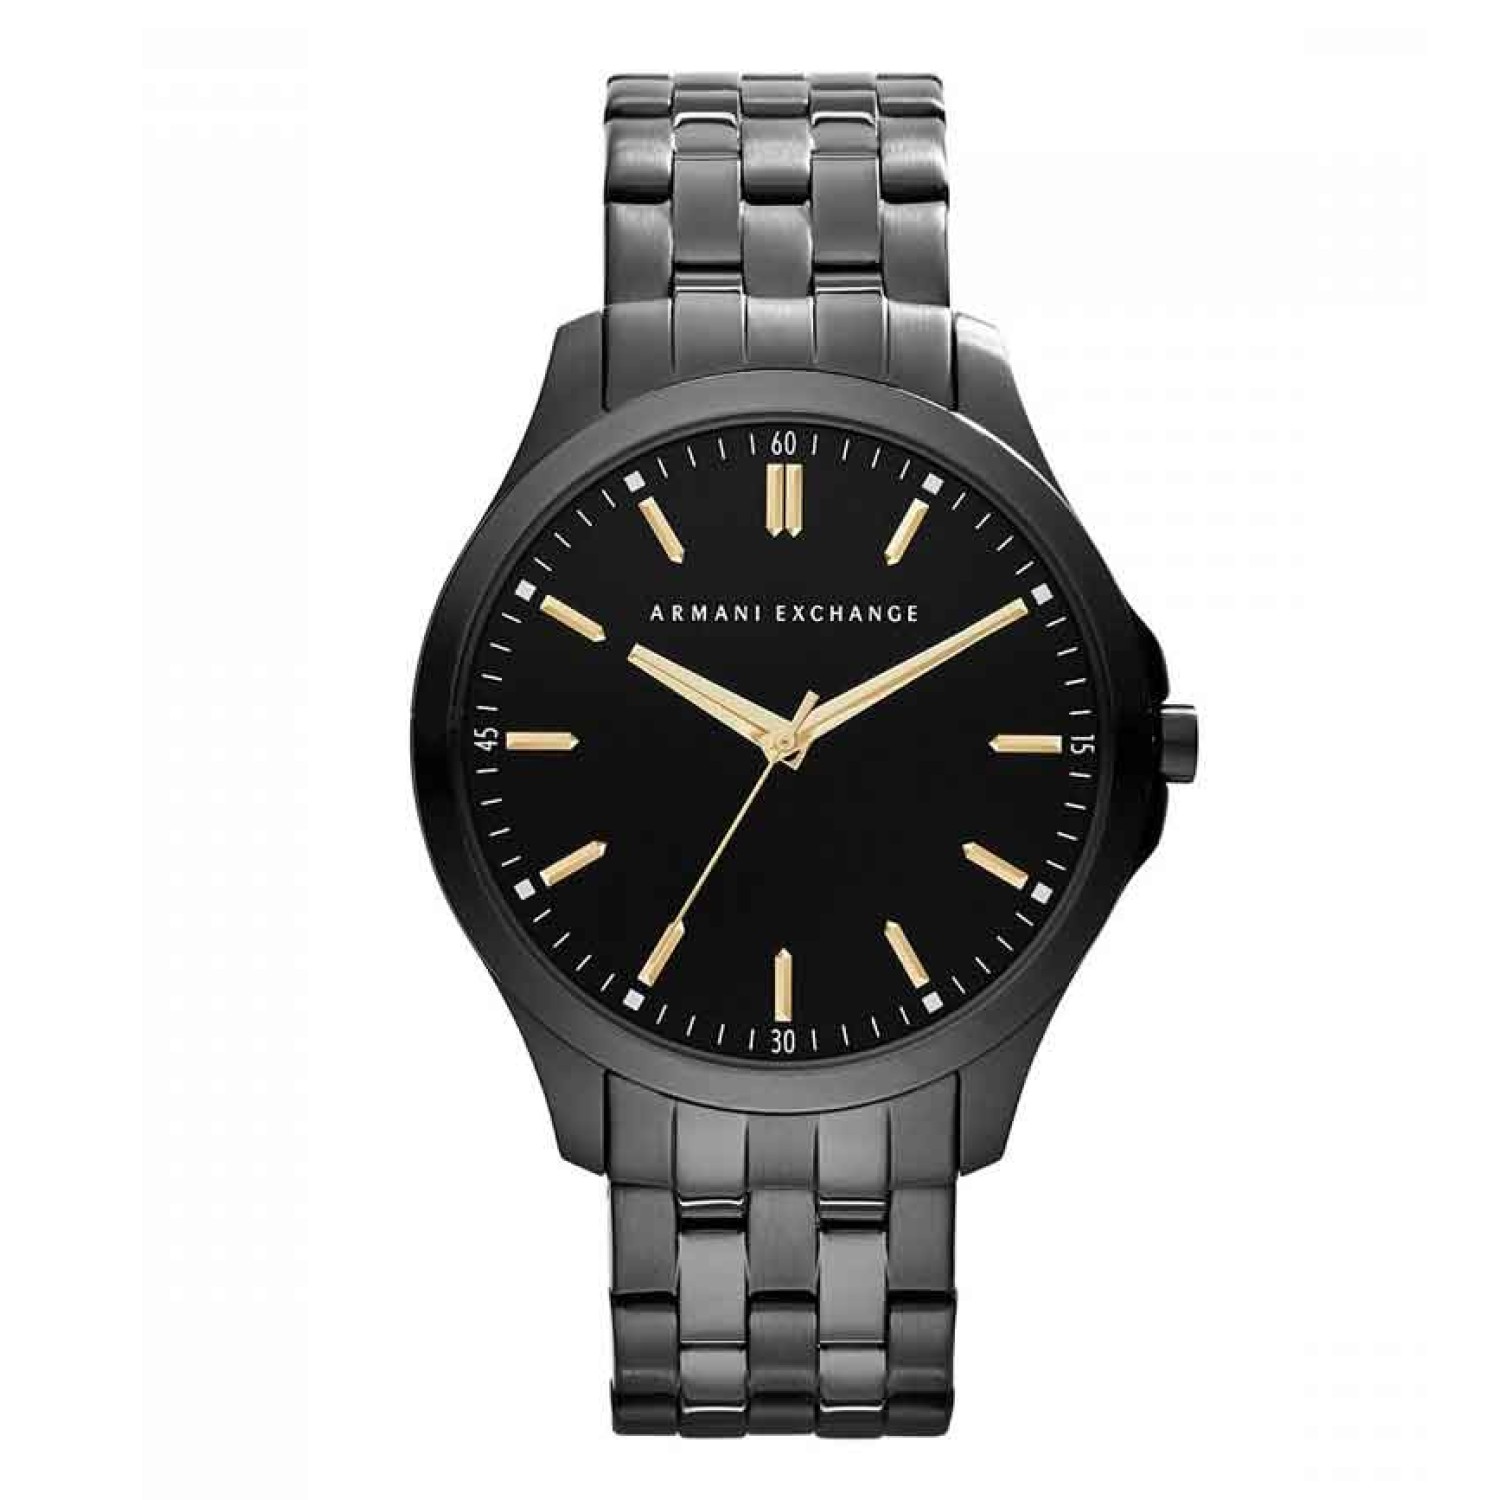 AX2144 A|X  Armani Exchange Hampton Watch. This ultra-slim gents AX2144  Armani Exchange Hampton Low Profile watch has a black ion-plated steel case and is fitted with an analogue quartz movement. It is fastened with a black metal bracelet and has a black